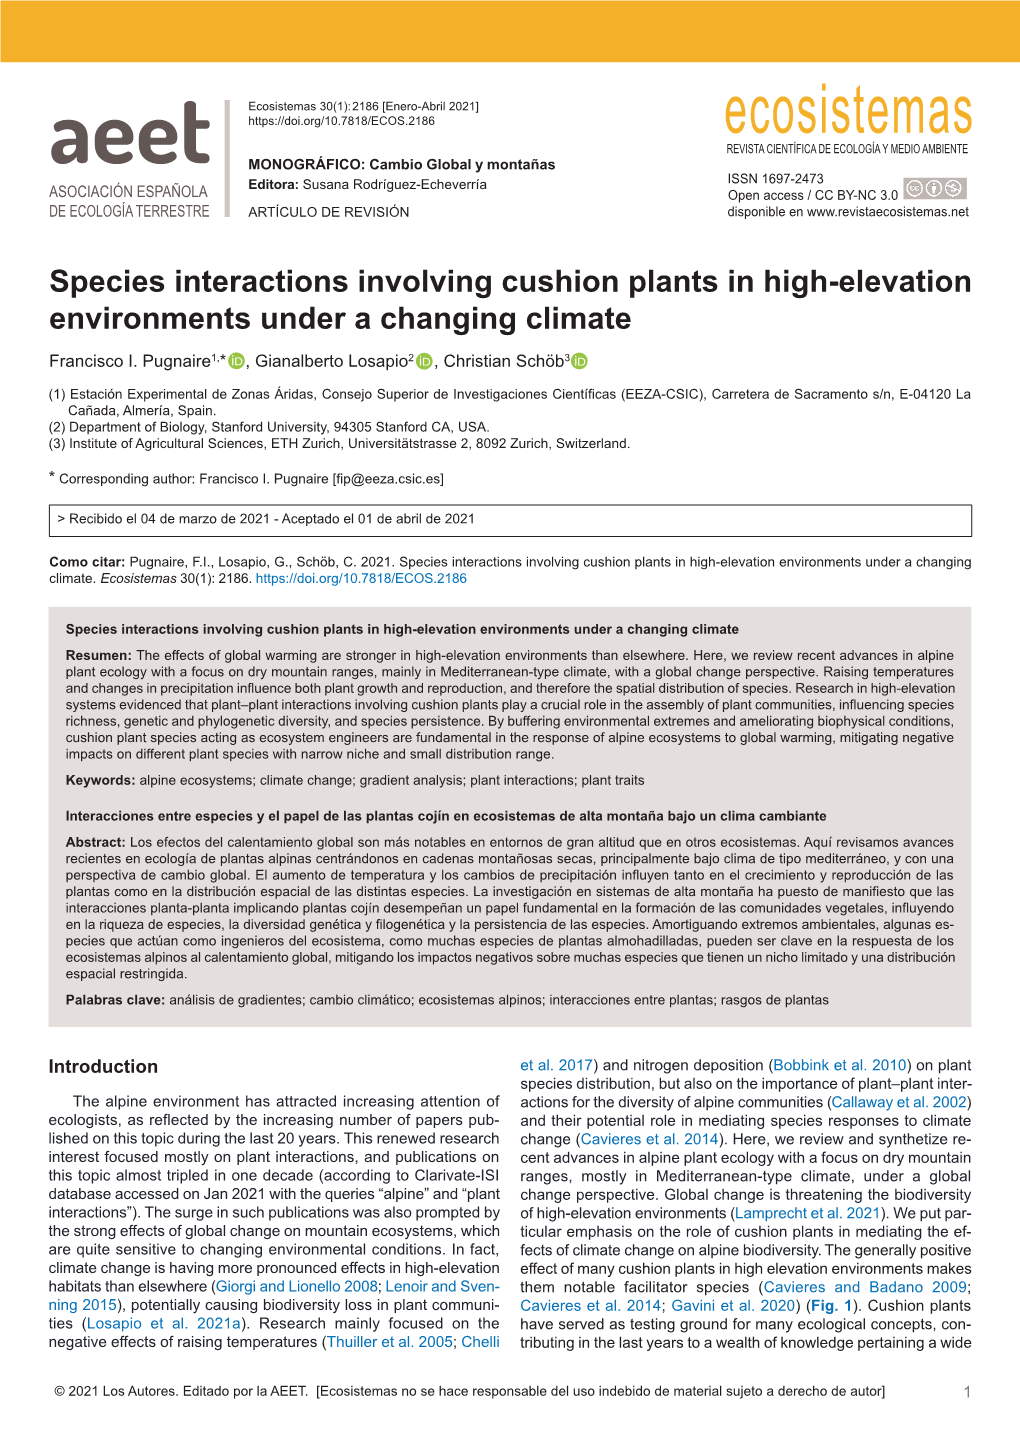 Species Interactions Involving Cushion Plants in High-Elevation Environments Under a Changing Climate Francisco I